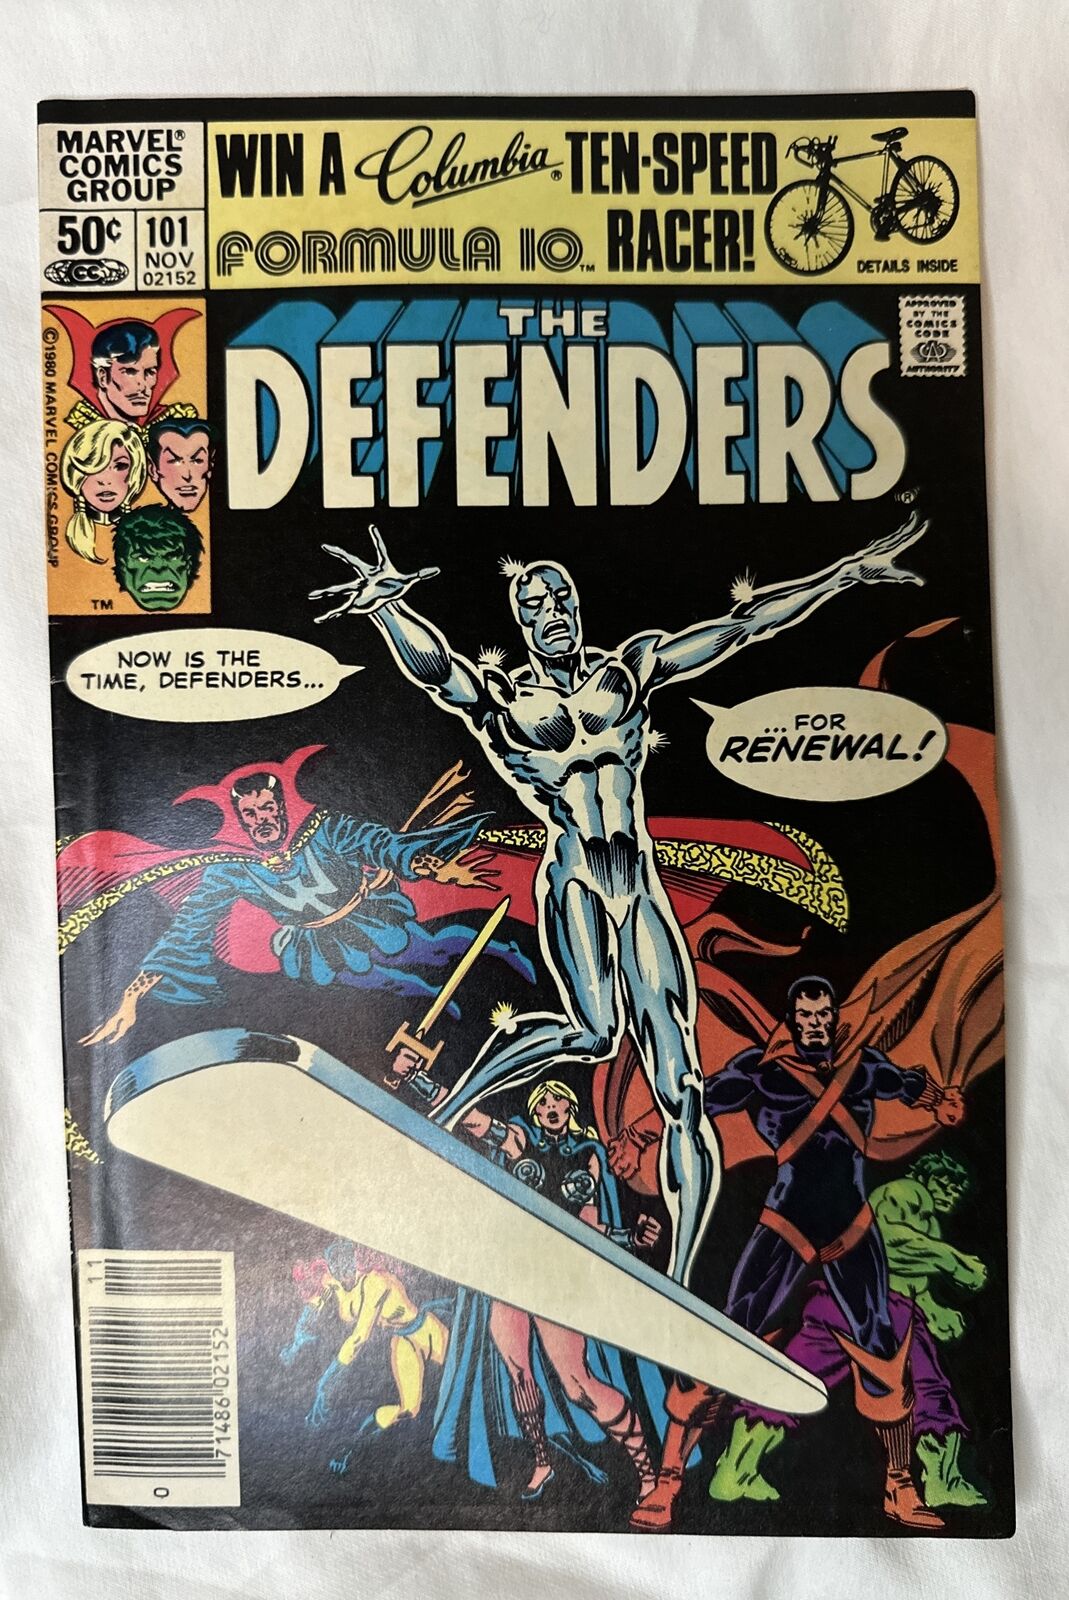 the DEFENDERS #101 1981 SILVER SURFER